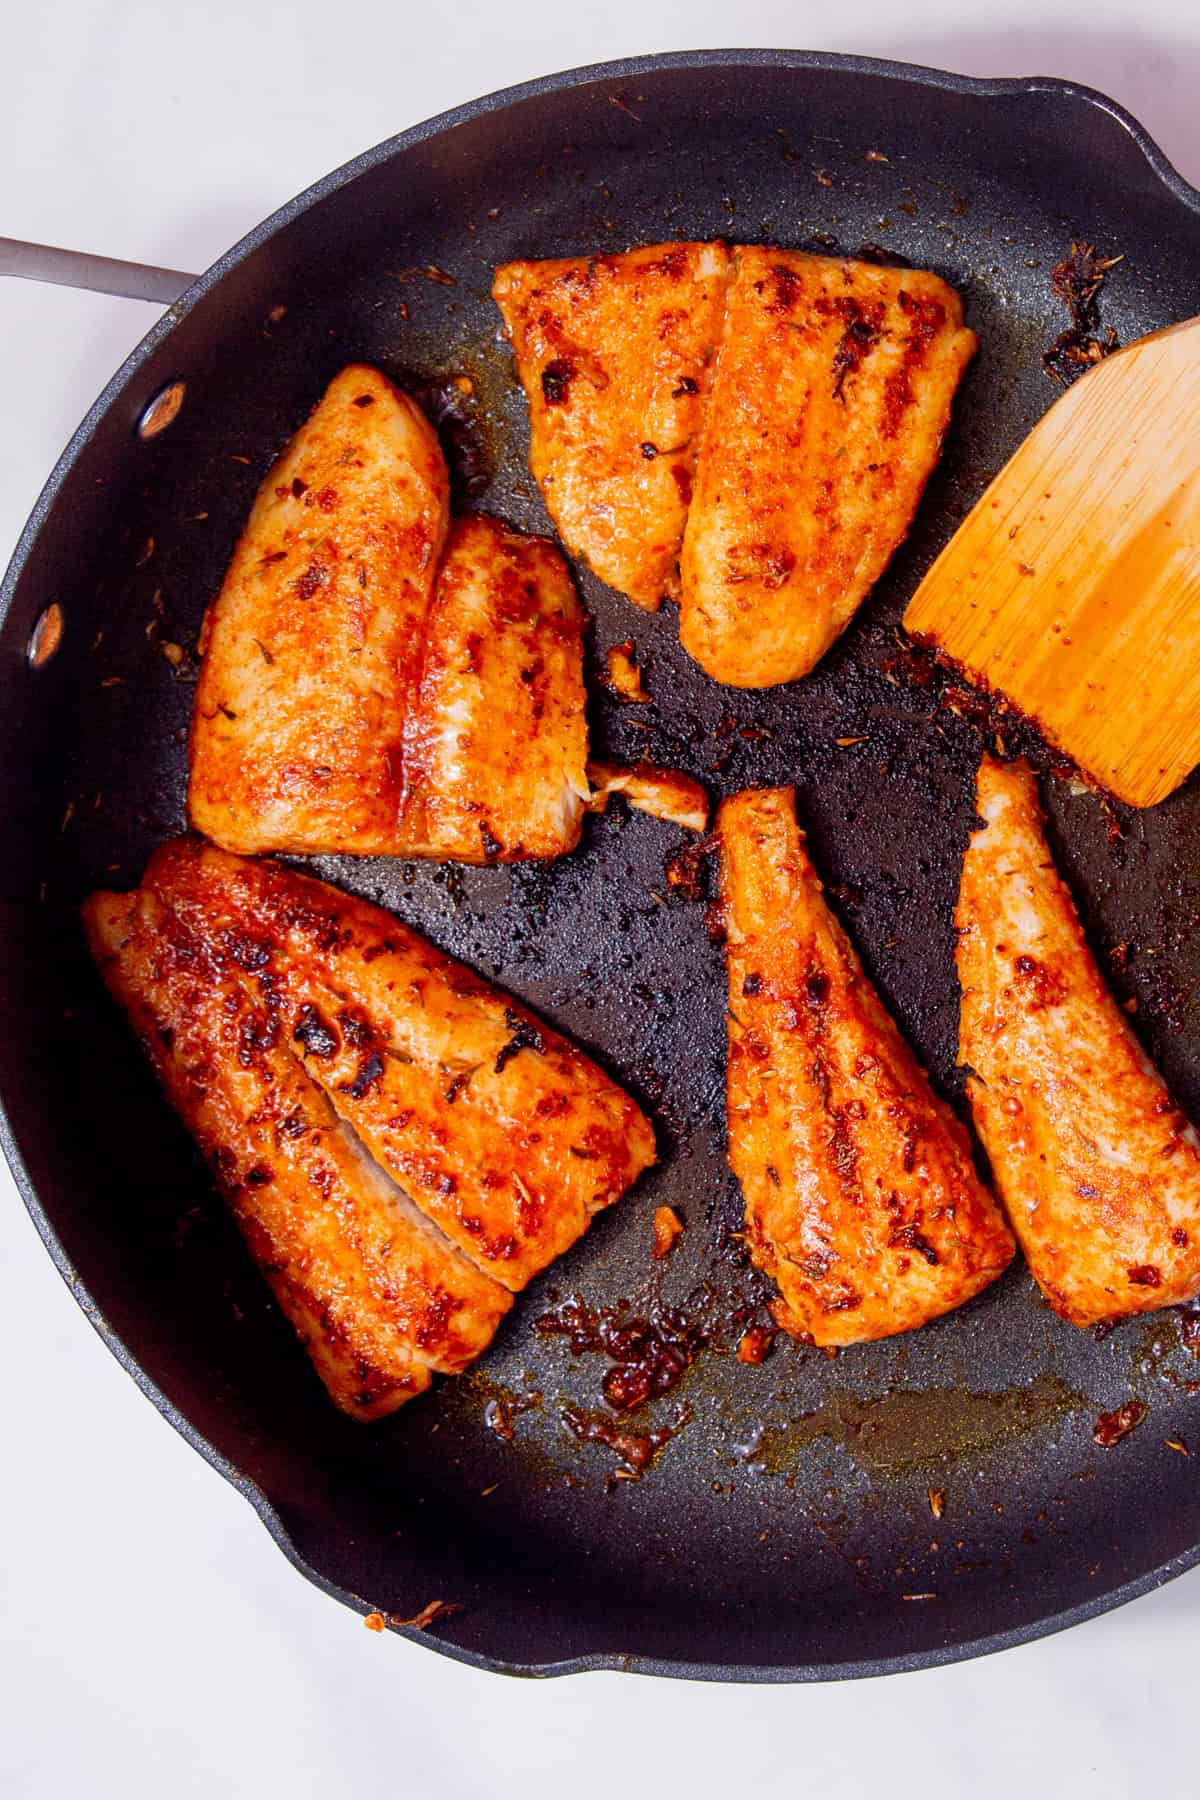 pieces of fish covered in a golden brown seasoning frying in a pan with a wooden spoon in partial view.